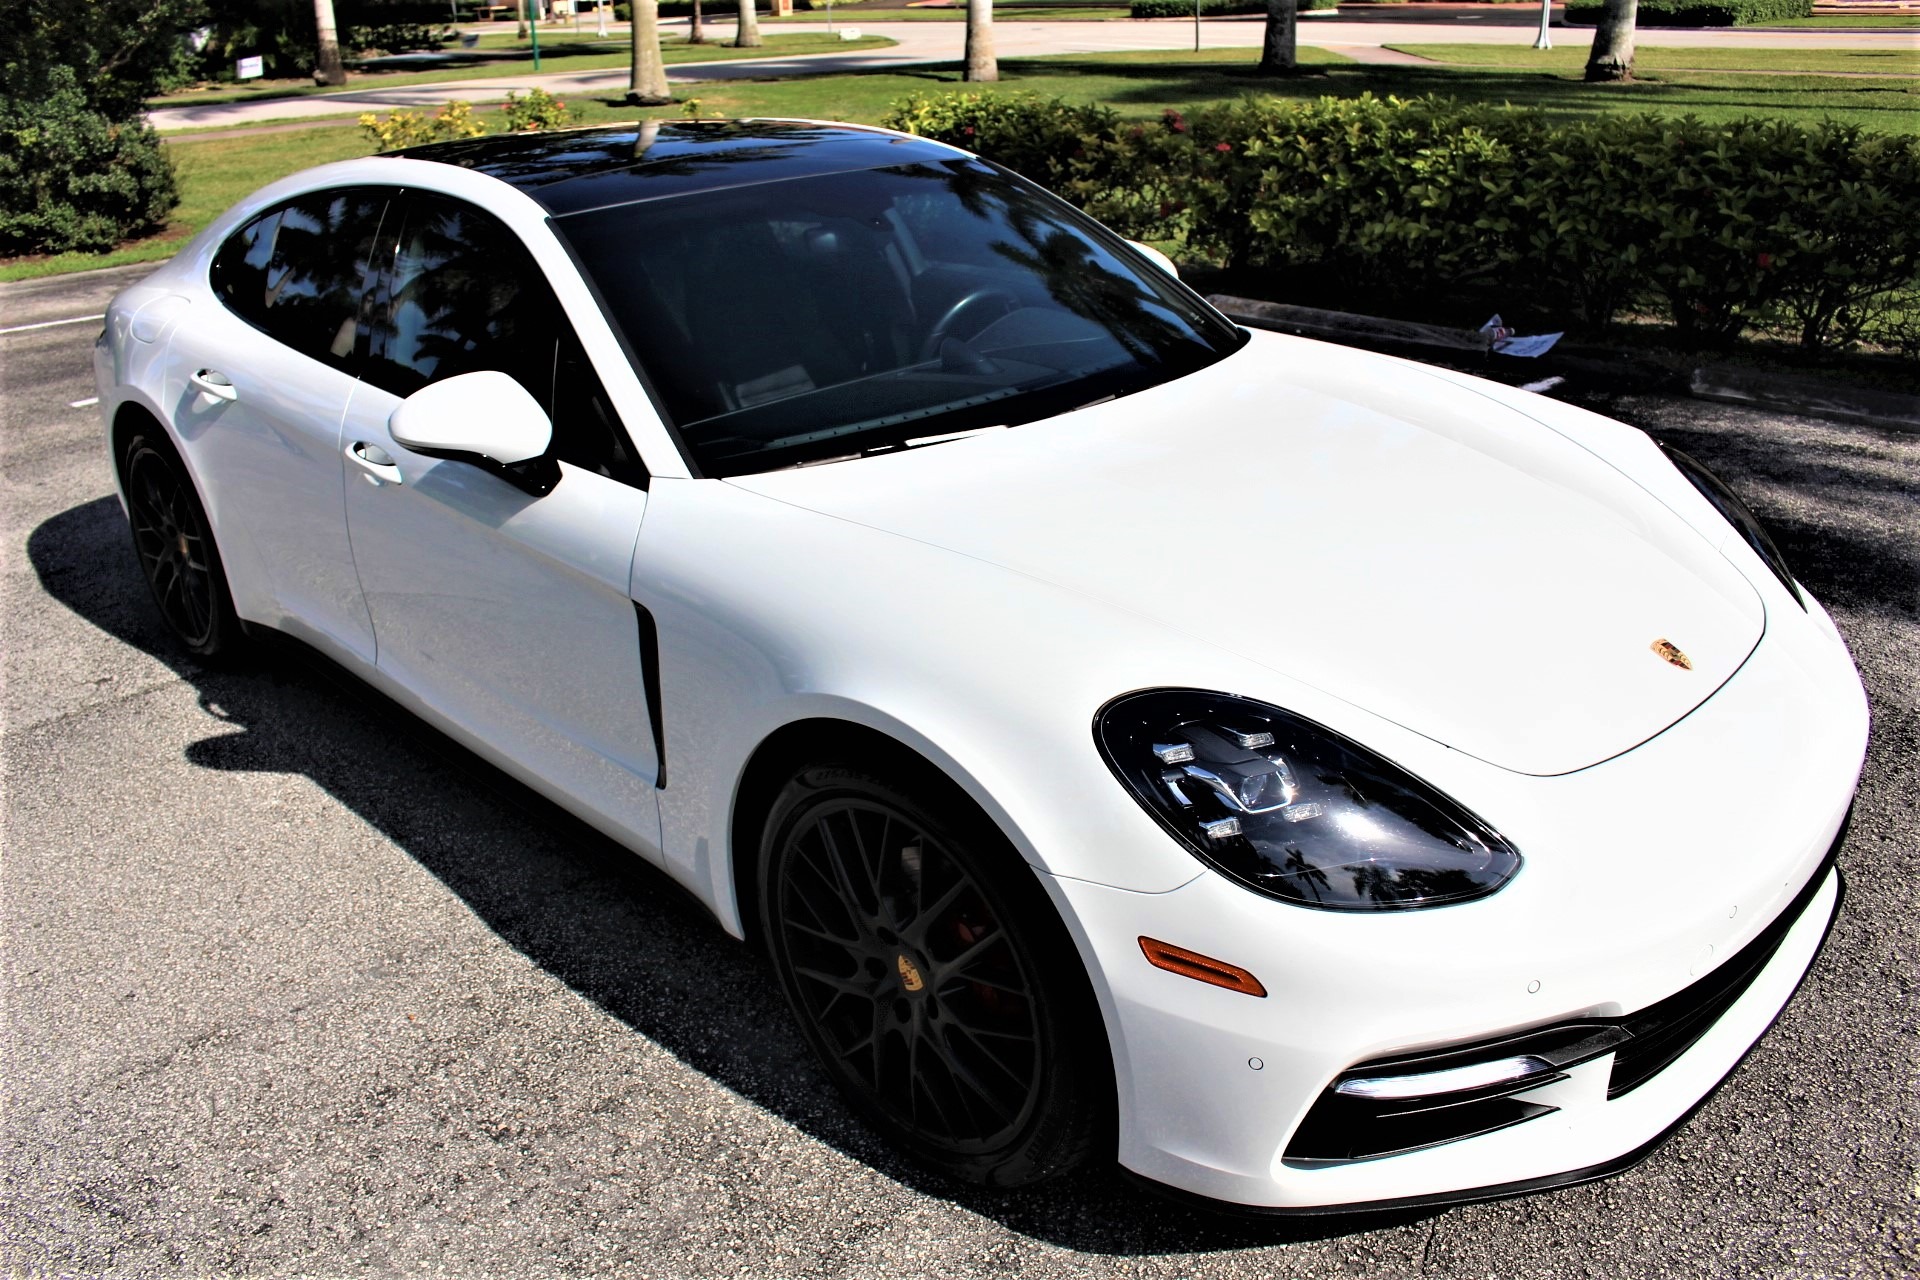 Used 2017 Porsche Panamera for sale Sold at The Gables Sports Cars in Miami FL 33146 3